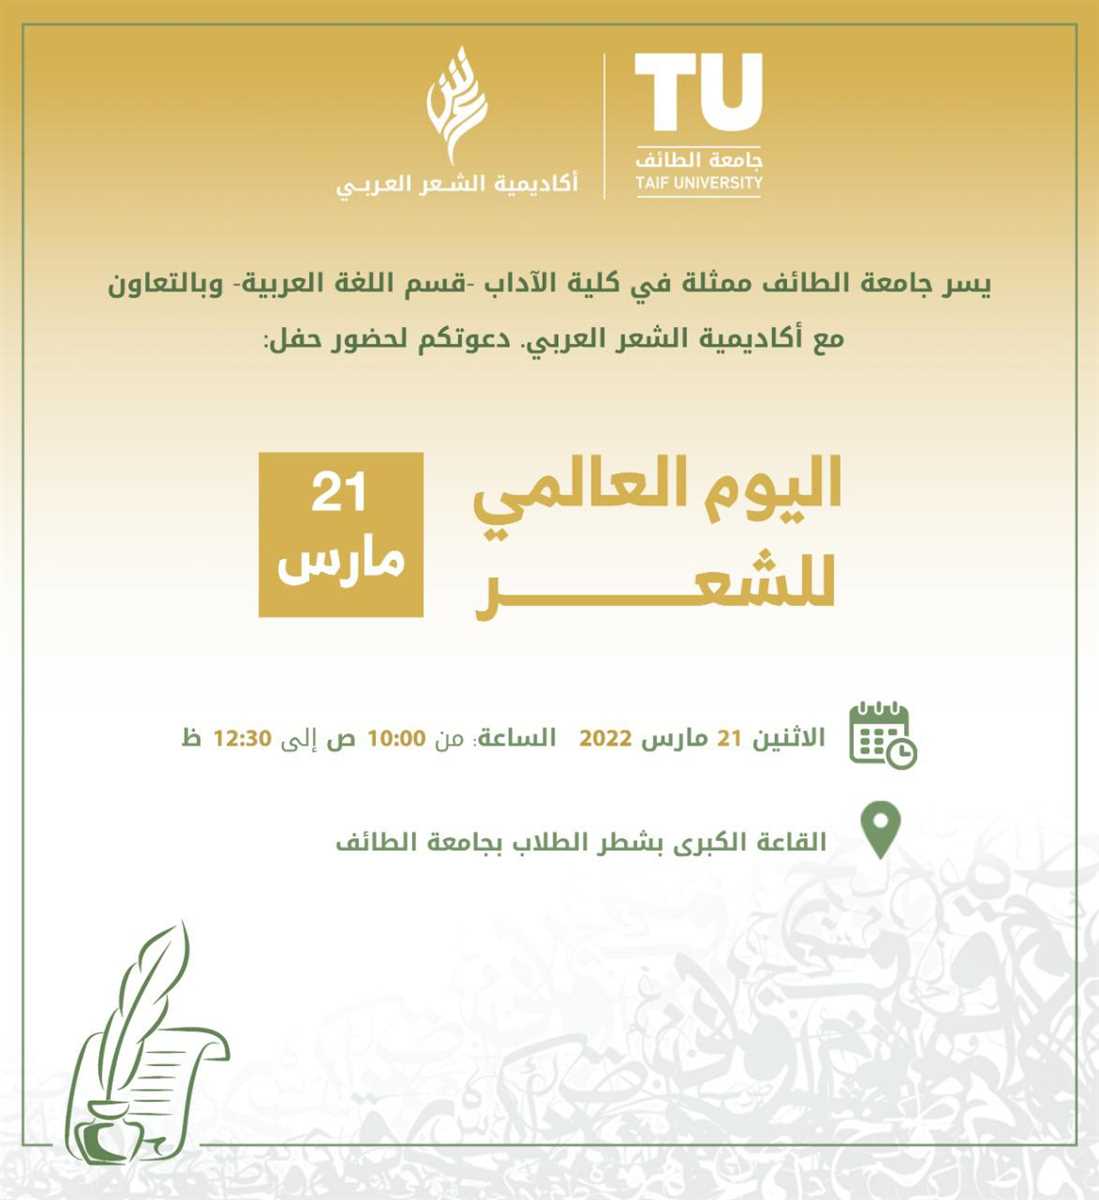 Celebrating Taif, the capital of Arab poetry 2022